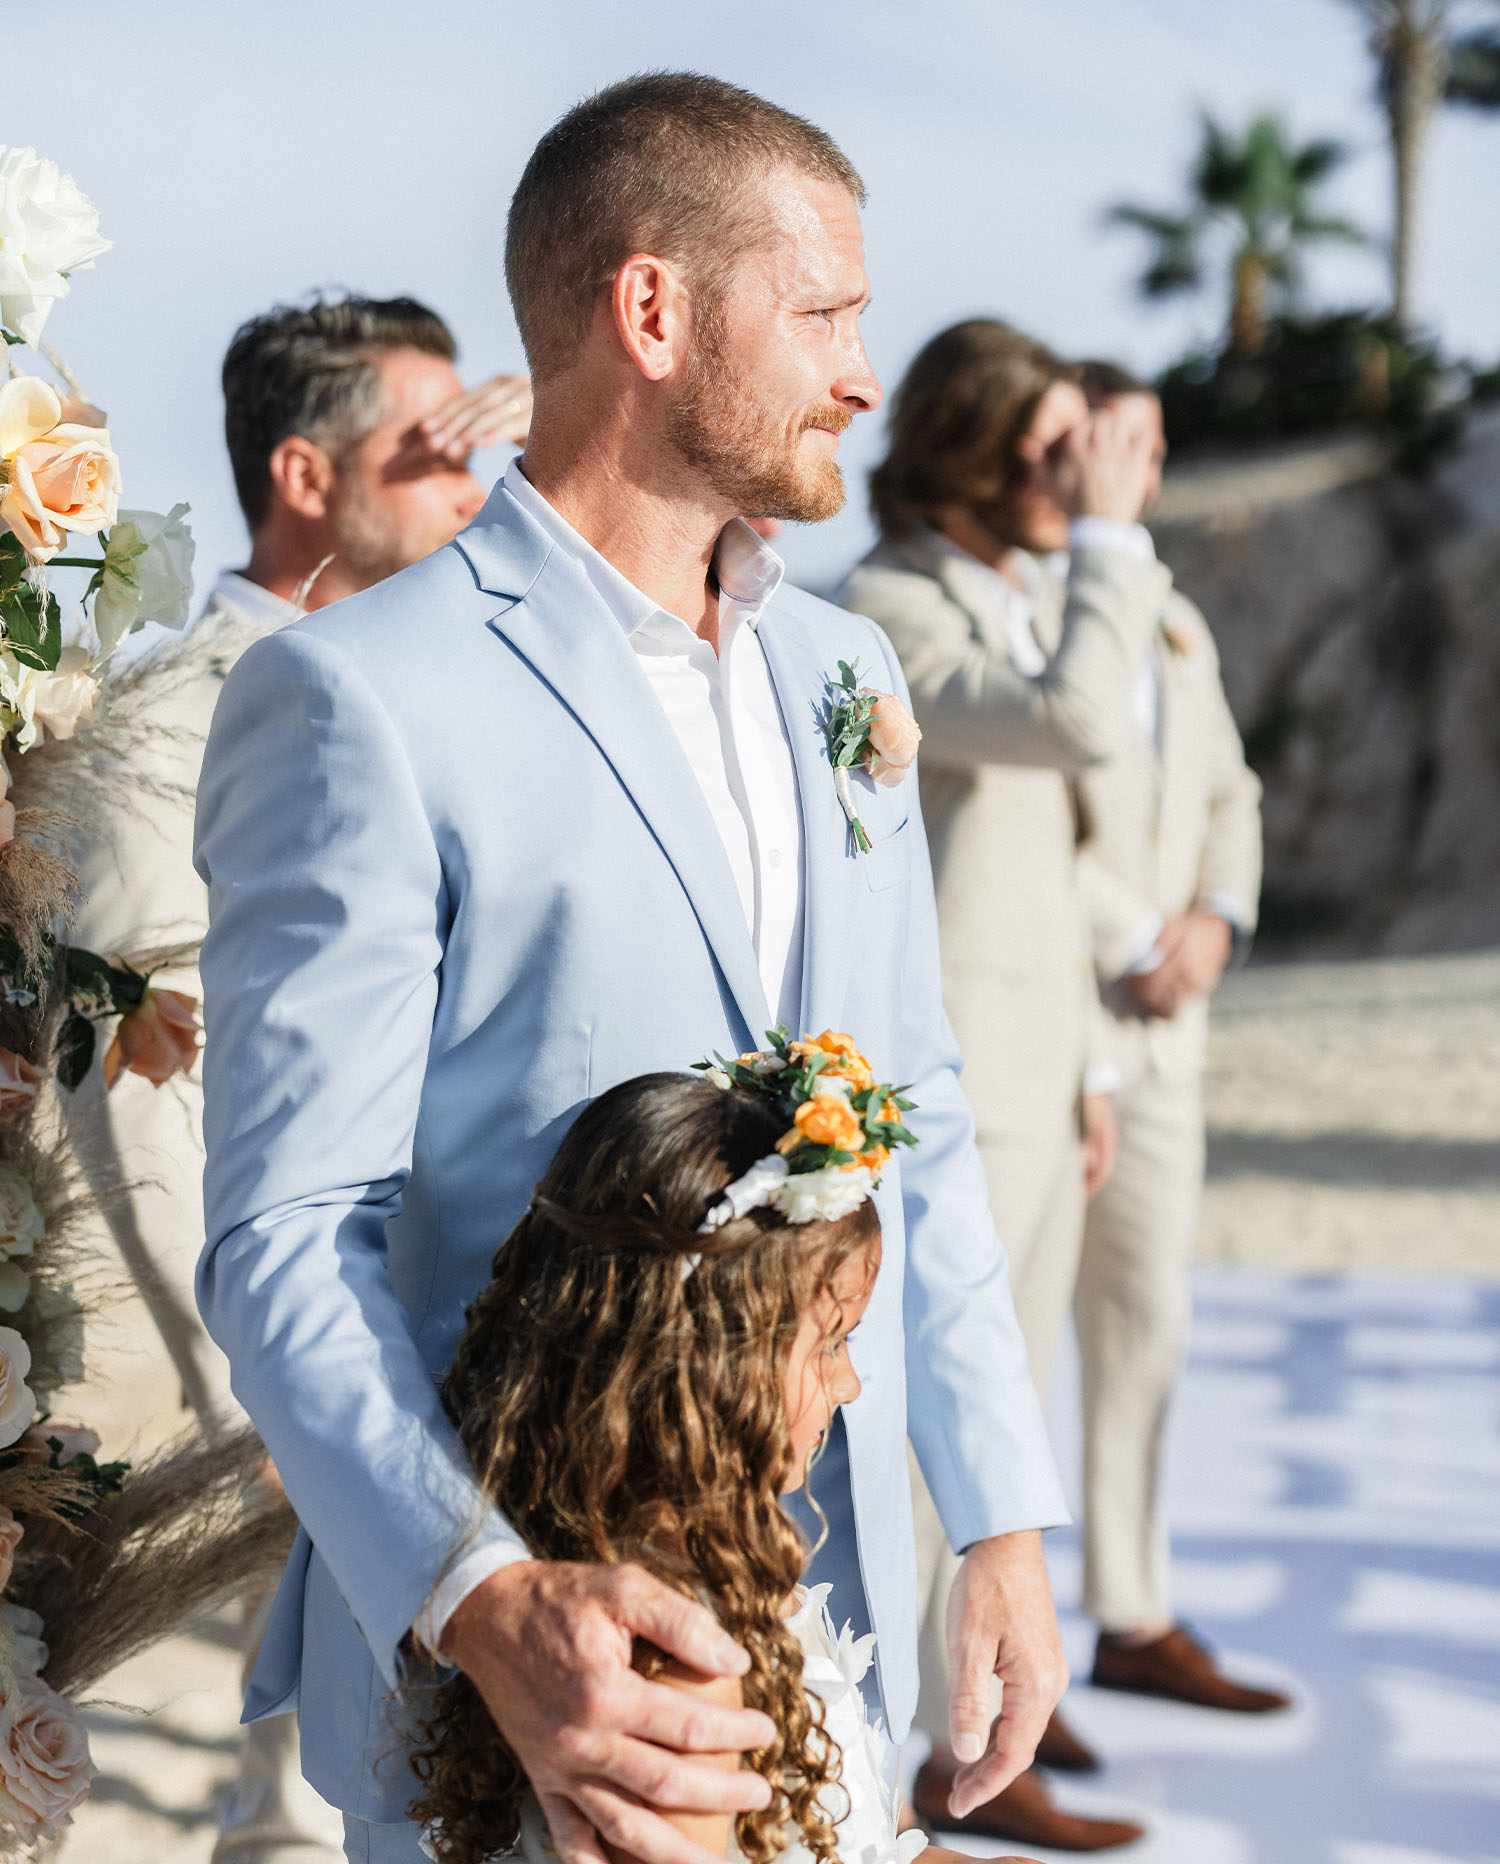 Nick James with Daughter Ella During Wedding Ceremony